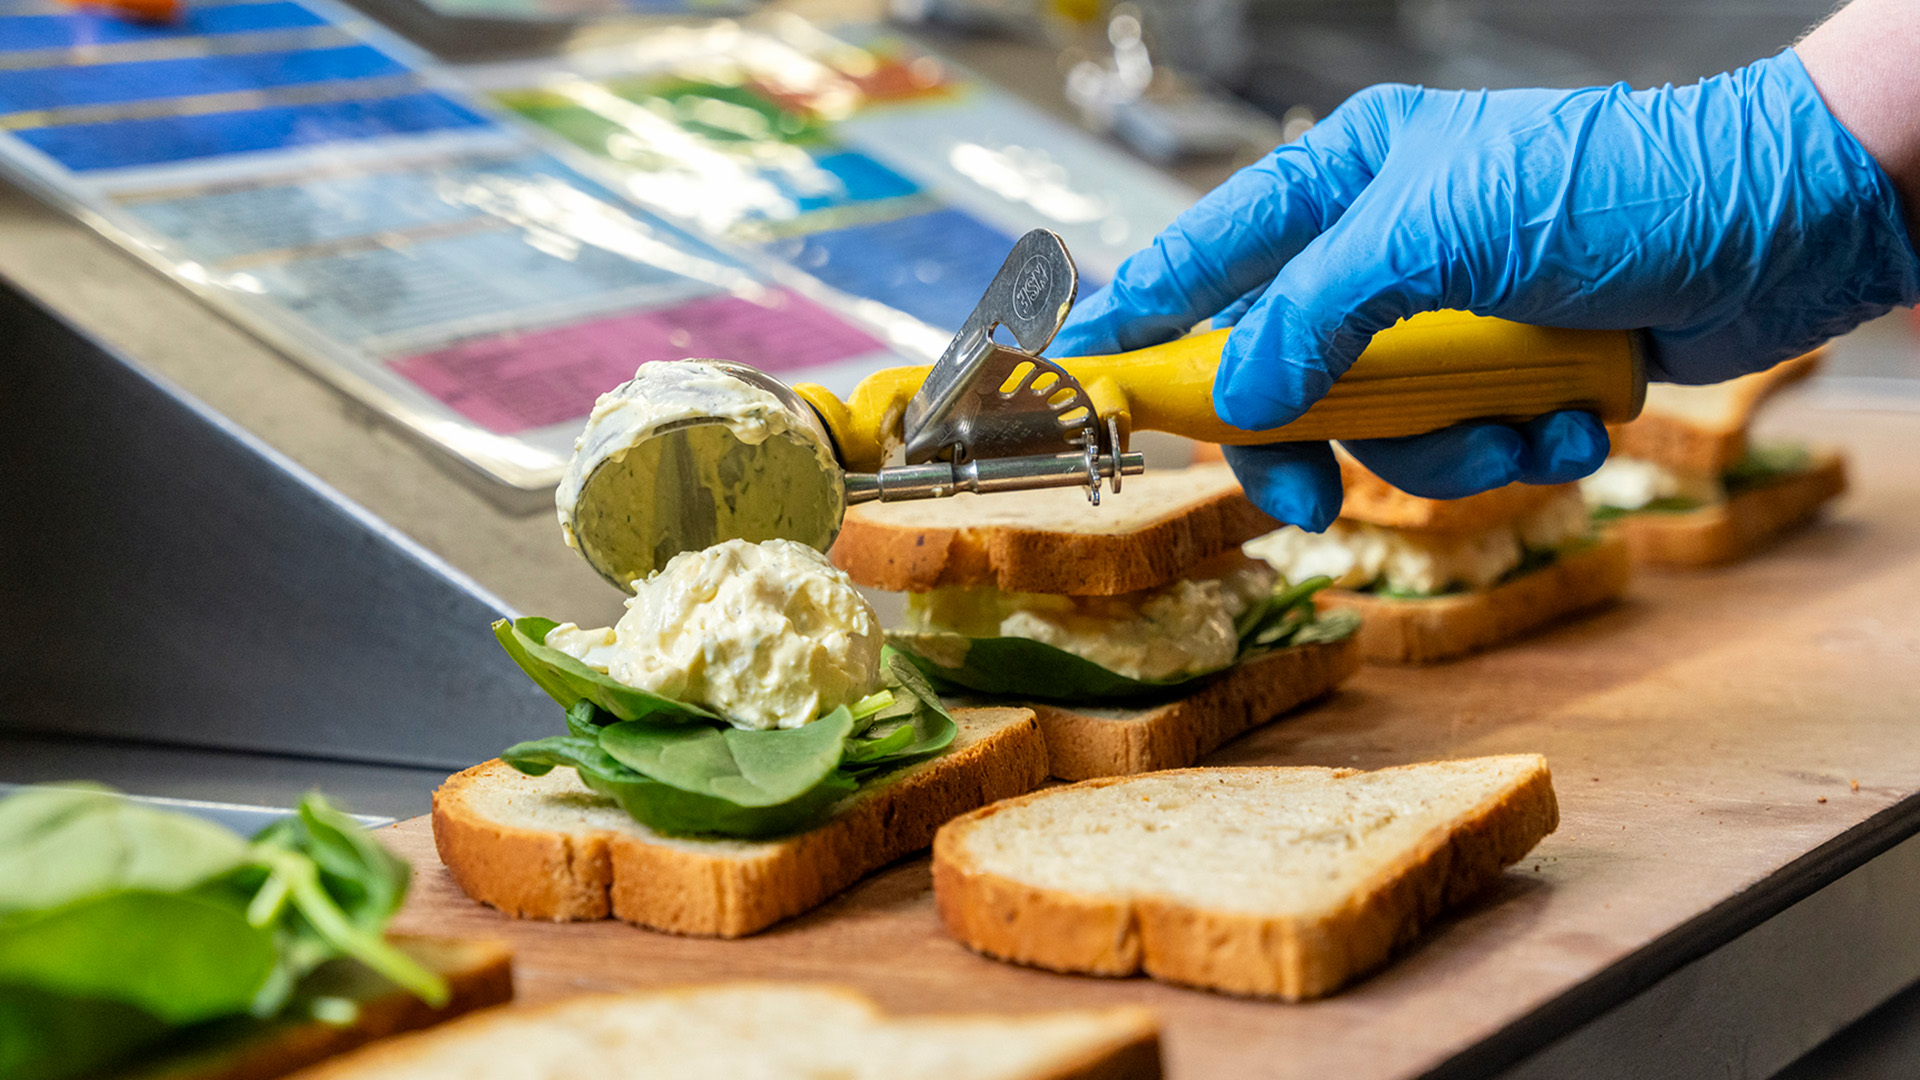 A person wearing blue gloves is using a scooper to place a dollop of sandwich filling onto slices of bread topped with spinach. The sandwiches, straight from the Whole Foods Coop Deli menu, are being prepared on a countertop, and various tools and ingredients are visible in the background.